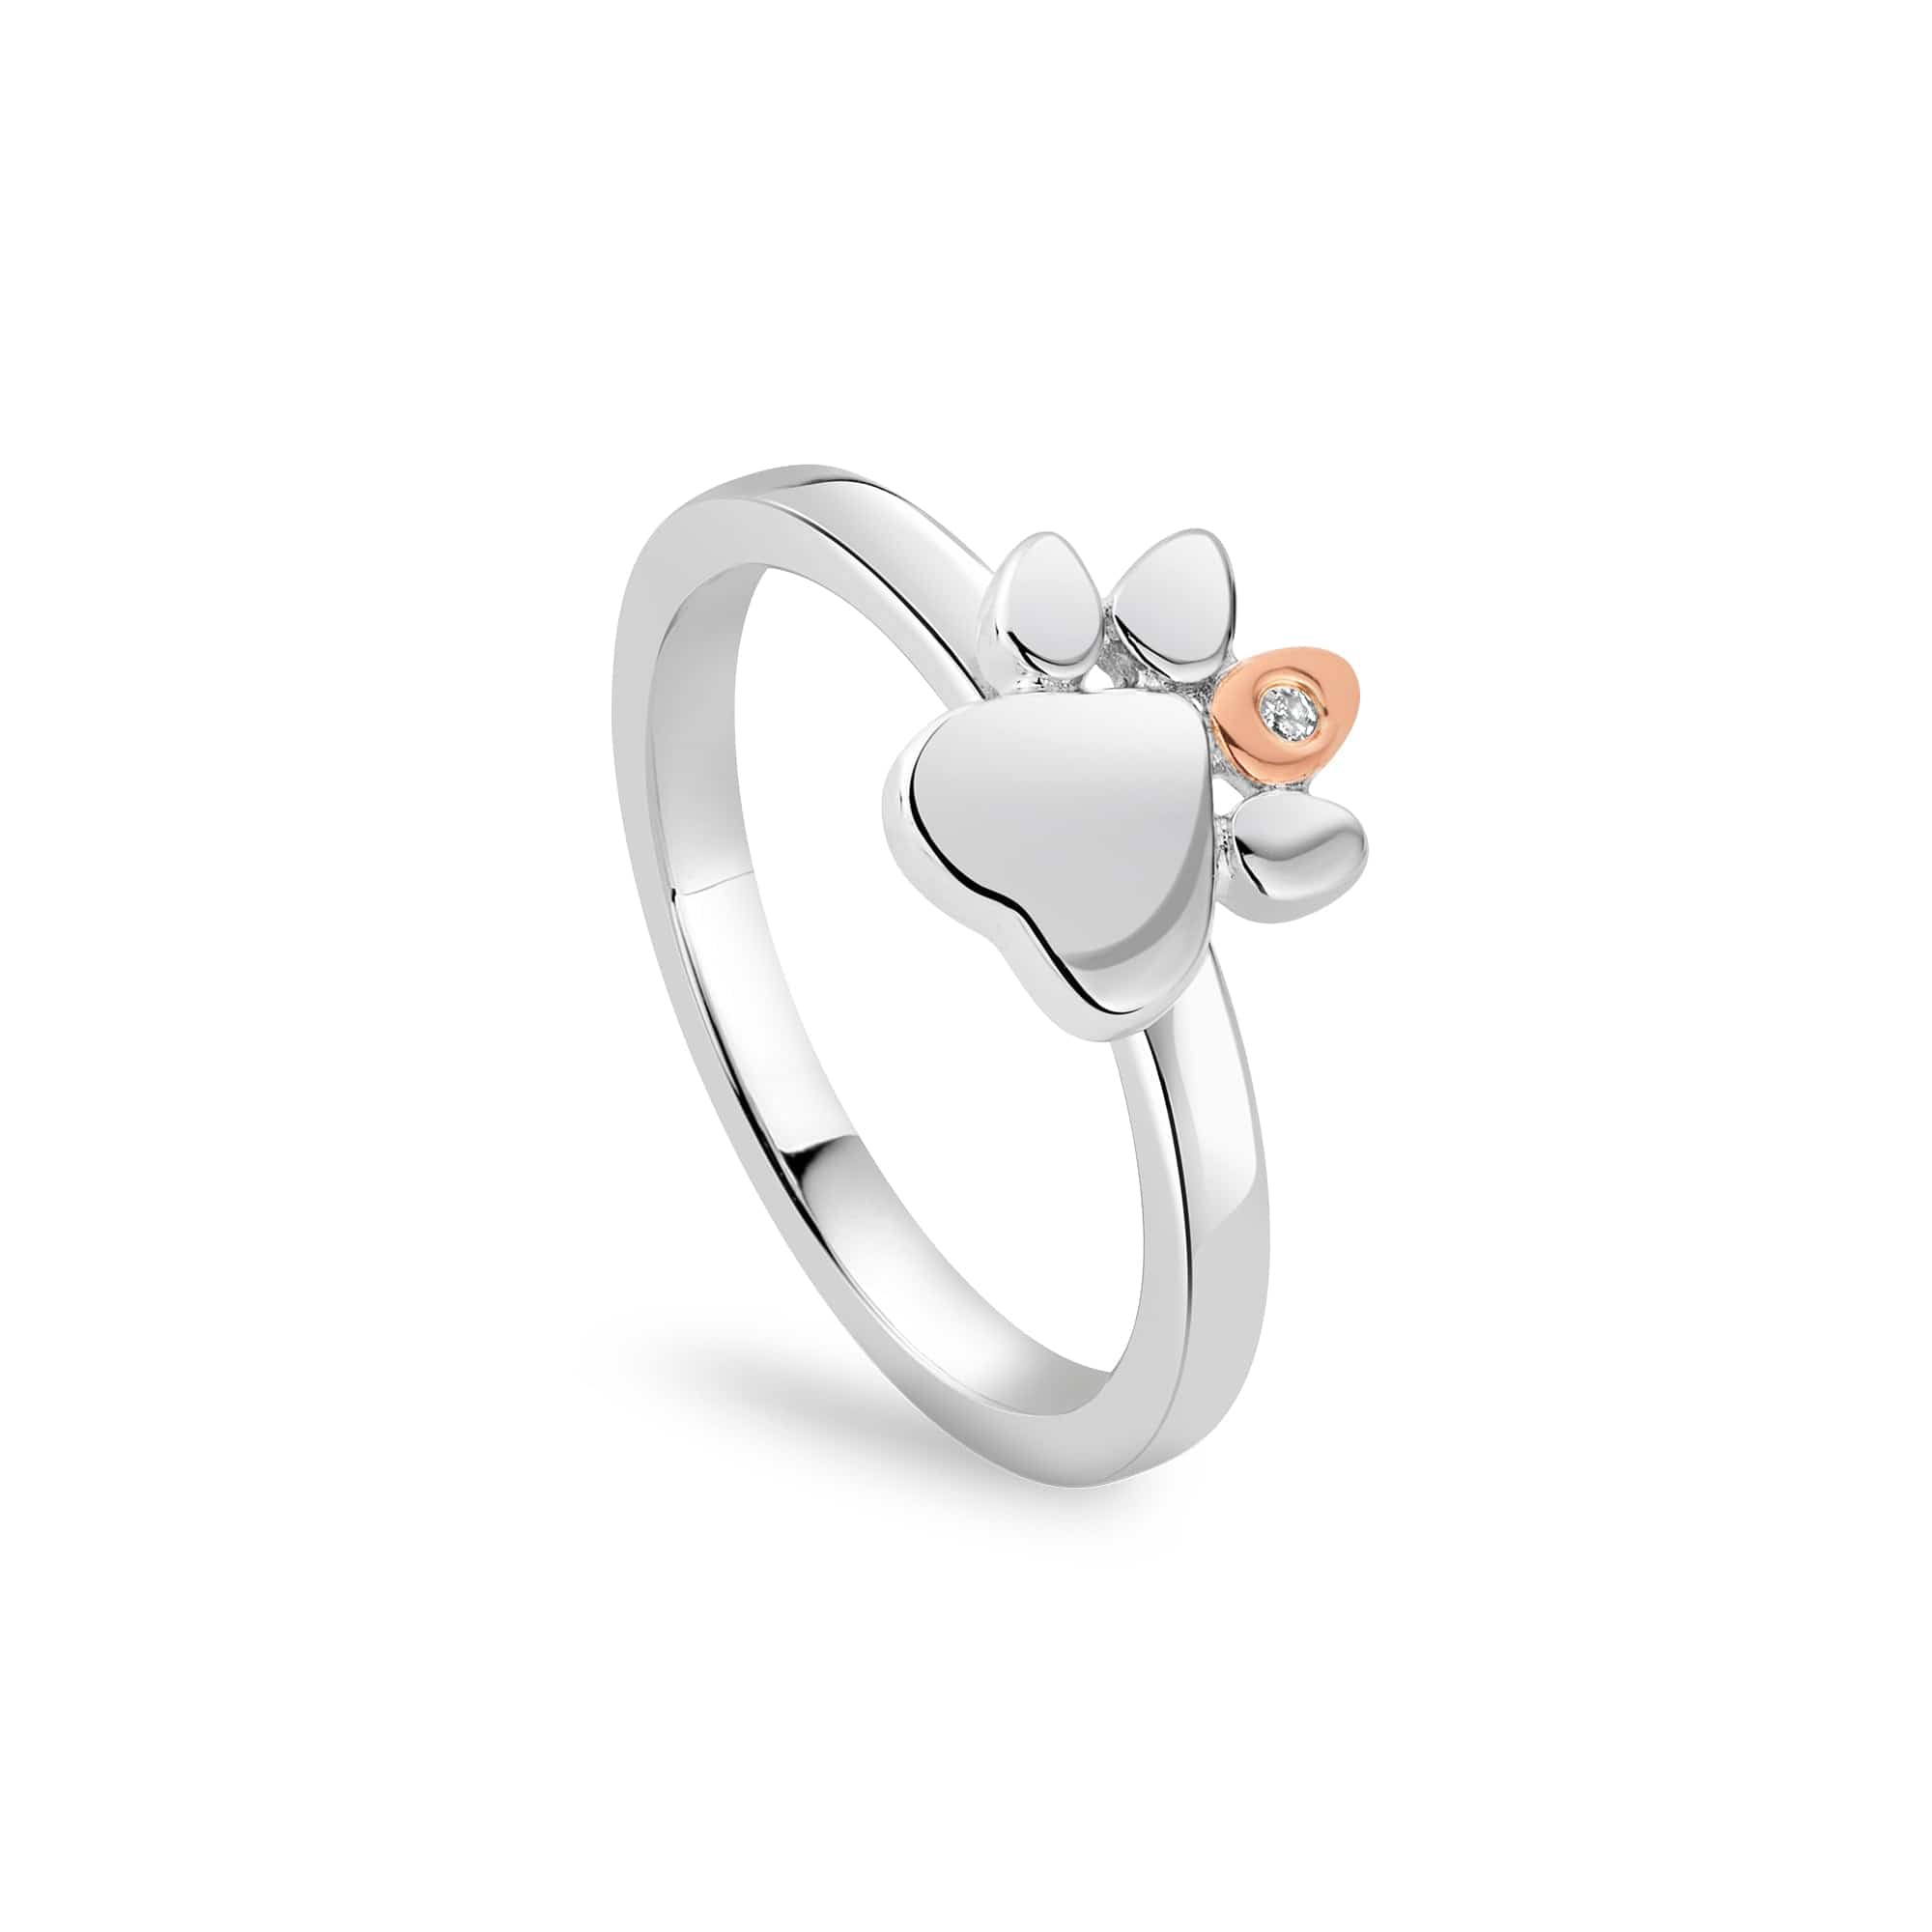 TANGPOET Paw Ring Infinity Sterling Silver Rings Cute Cat Dog Paw Puppy  Rings for Women Girls, Adjustable Open Ring Cat Dog Puppy Jewelry -  Walmart.com